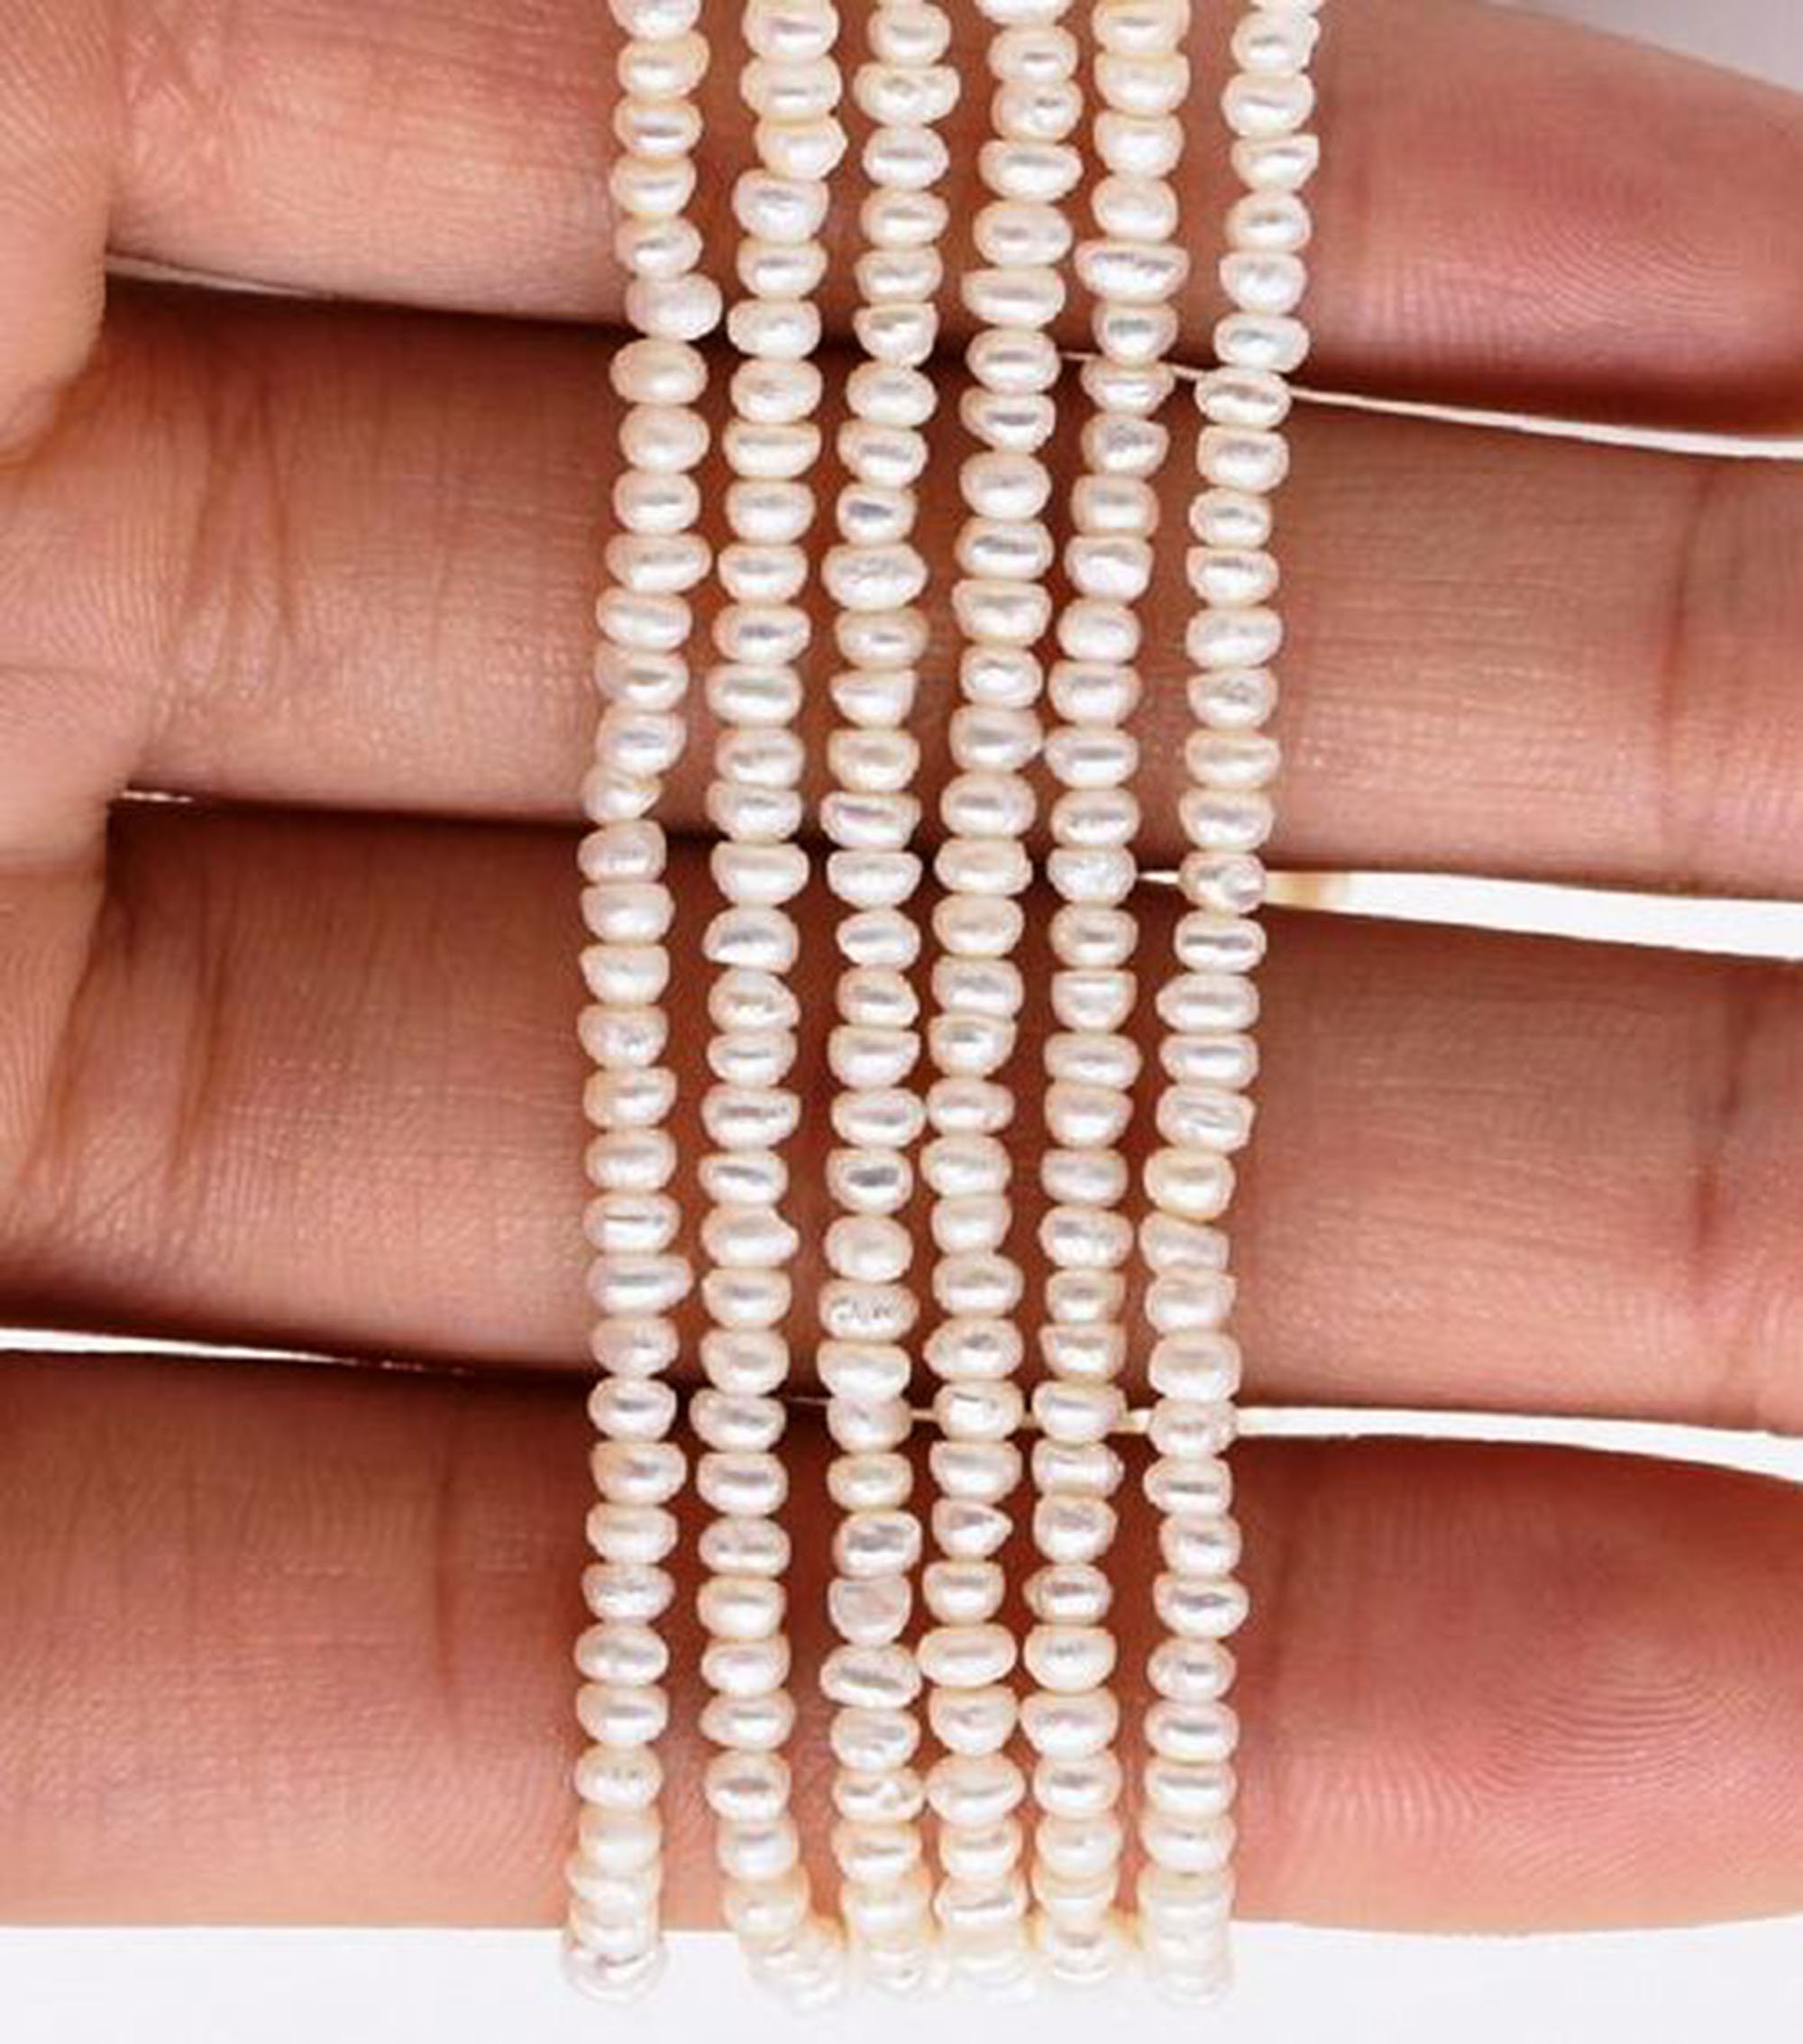 Bulk 1-2mm Natural White Tiny Seed Freshwater Pearl Beads, Genuine  Freshwater Pearls, Cultured White Small Seed Pearls,Tiny Pearls PB783